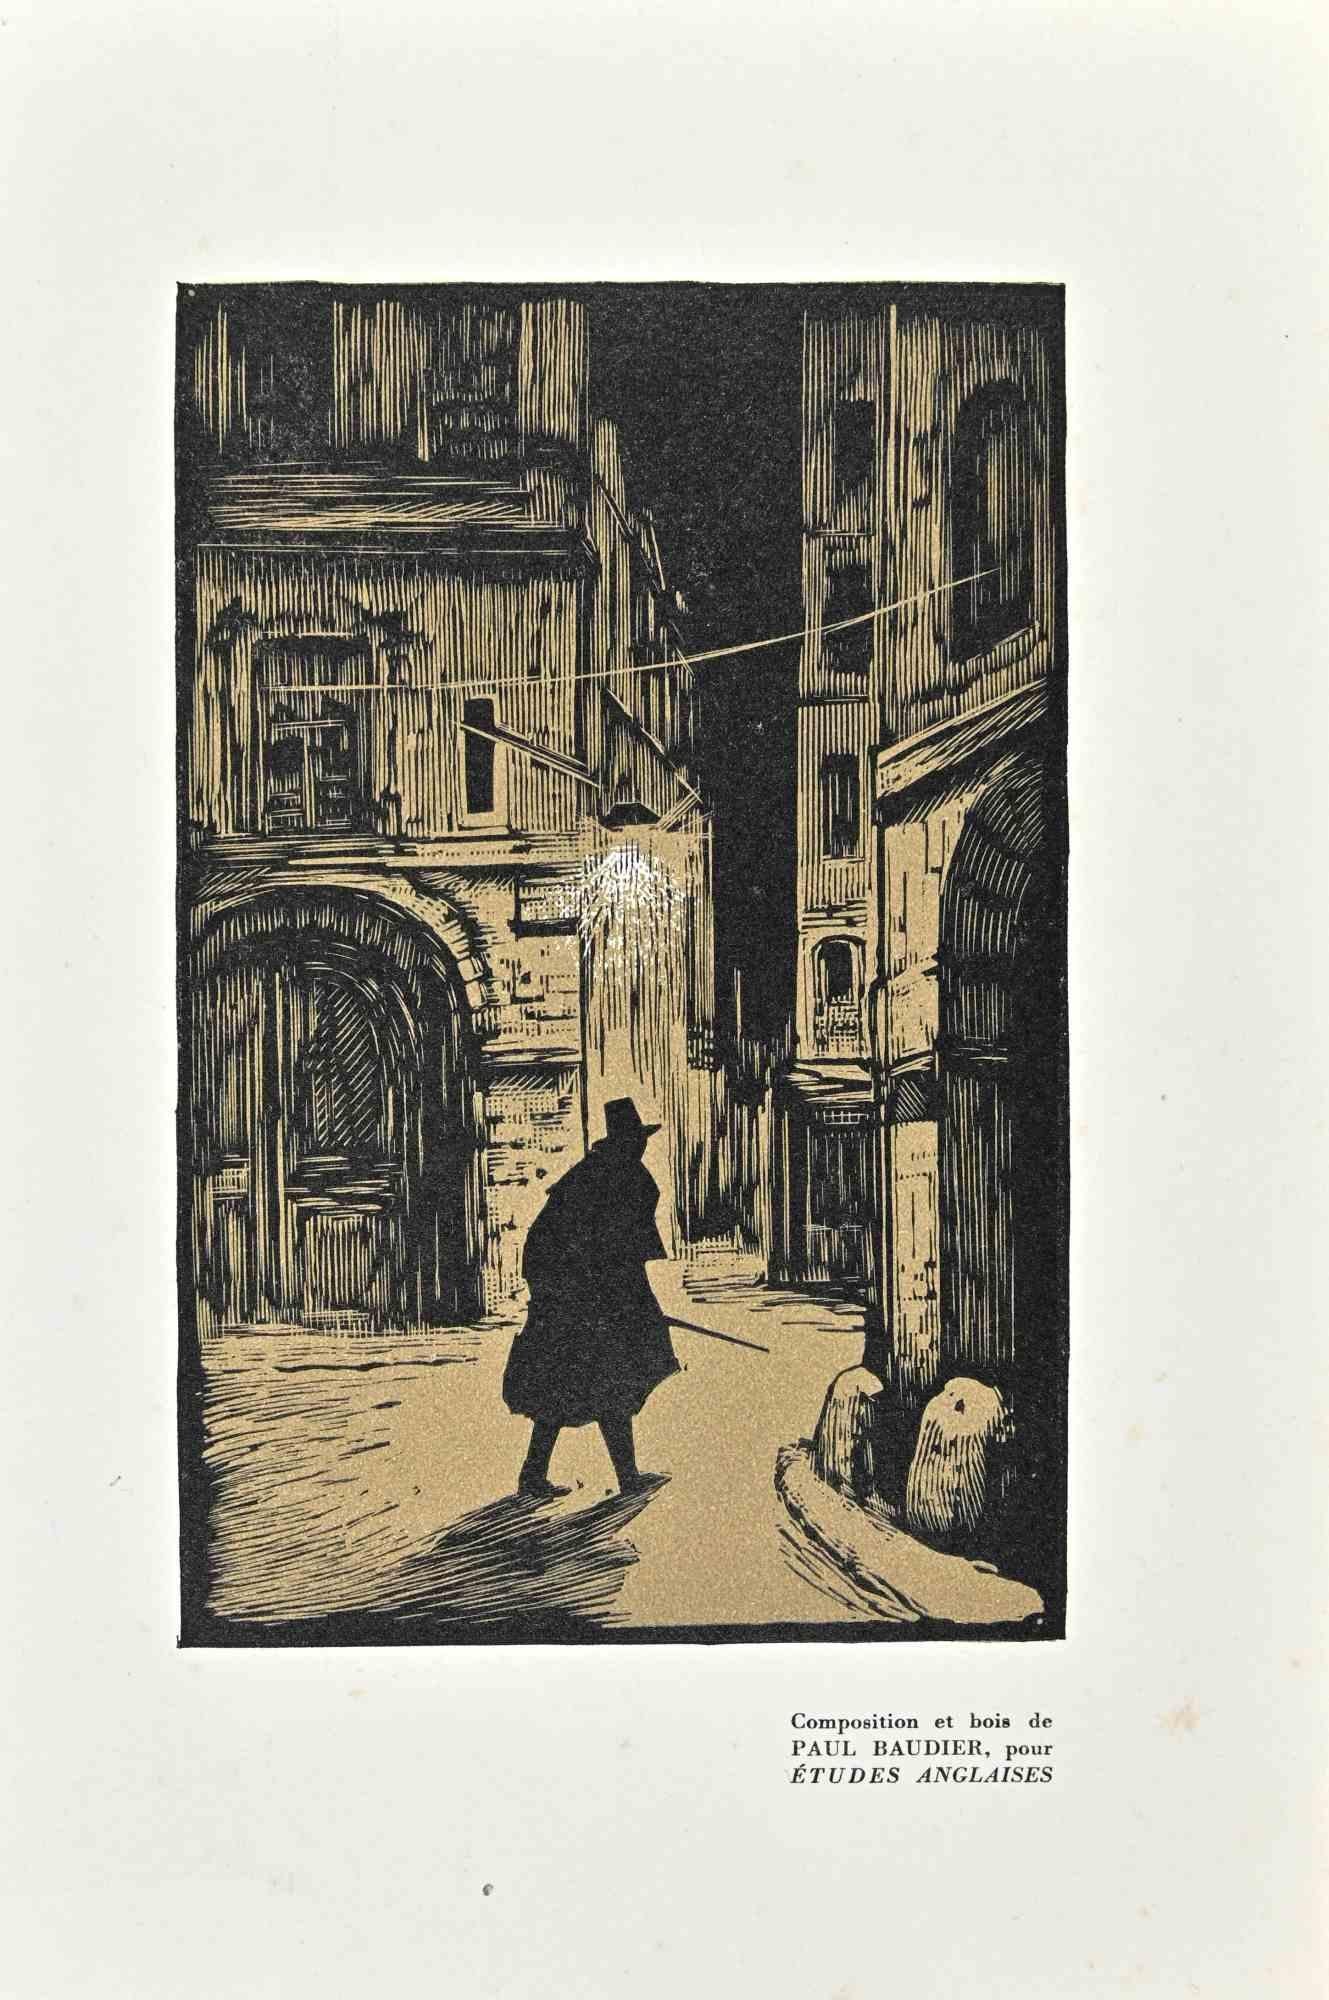 The Cityscape in Night is an original woodcut print on ivory-colored paper realized by Paul Baudier (1881-1962) in the 1930s.

On the lower right description in French.

Very good conditions.

Paul Baudier, (born October 18, 1881 in Paris and died